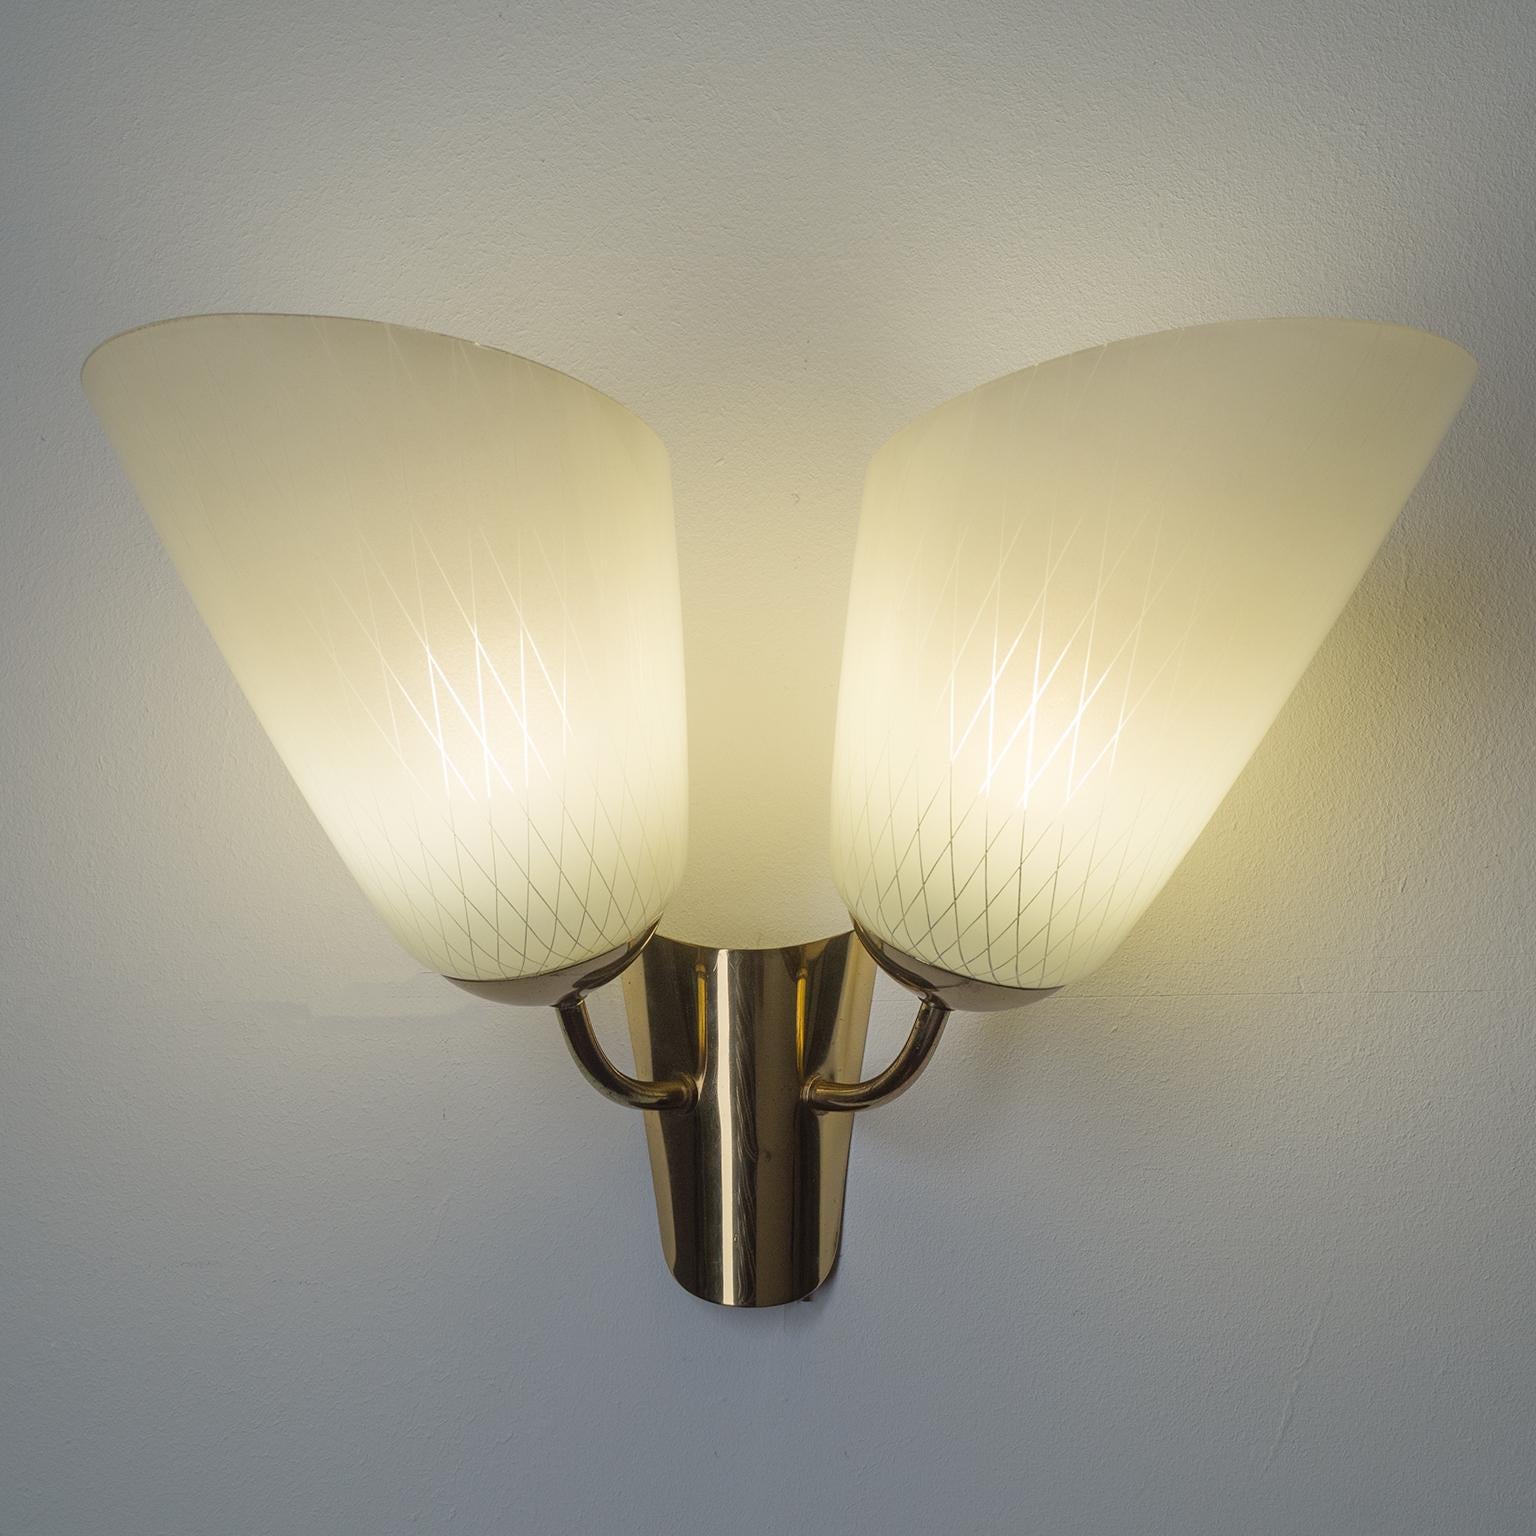 Mid-Century Modern Two-Arm Wall Lamp, 1940s, Enameled Glass and Brass